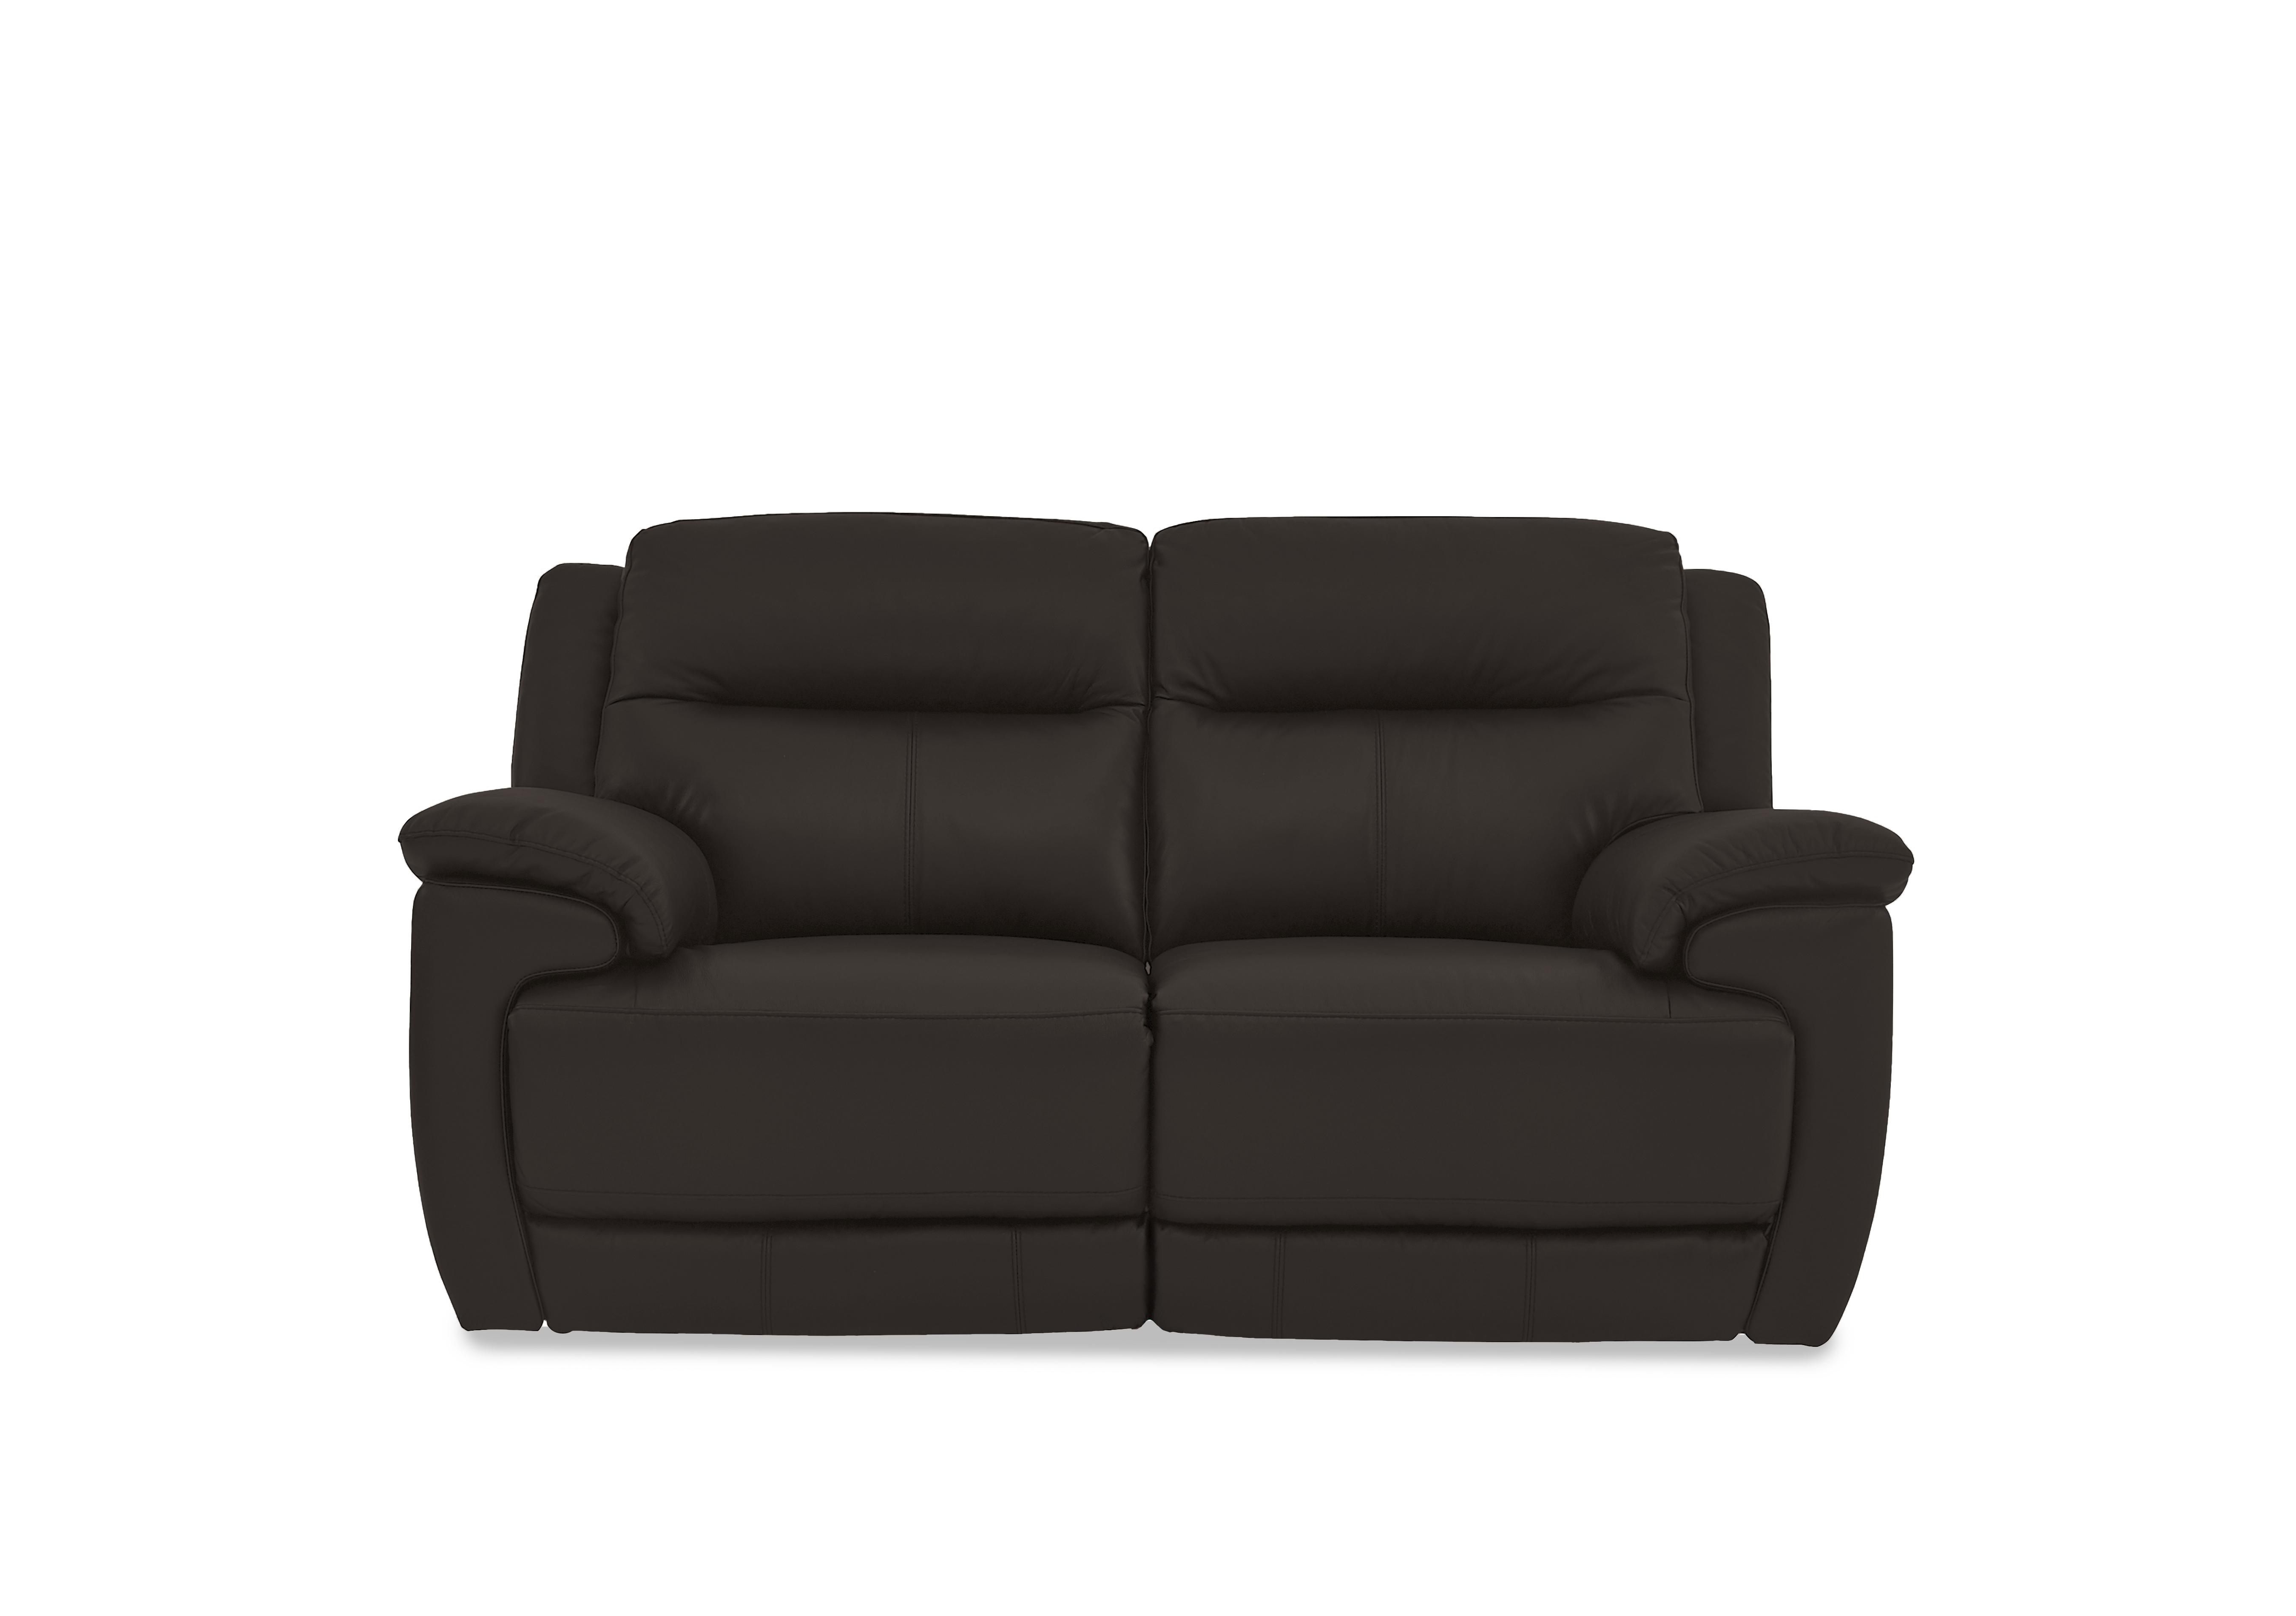 Touch 2 Seater Leather Sofa in Bv-1748 Dark Chocolate on Furniture Village